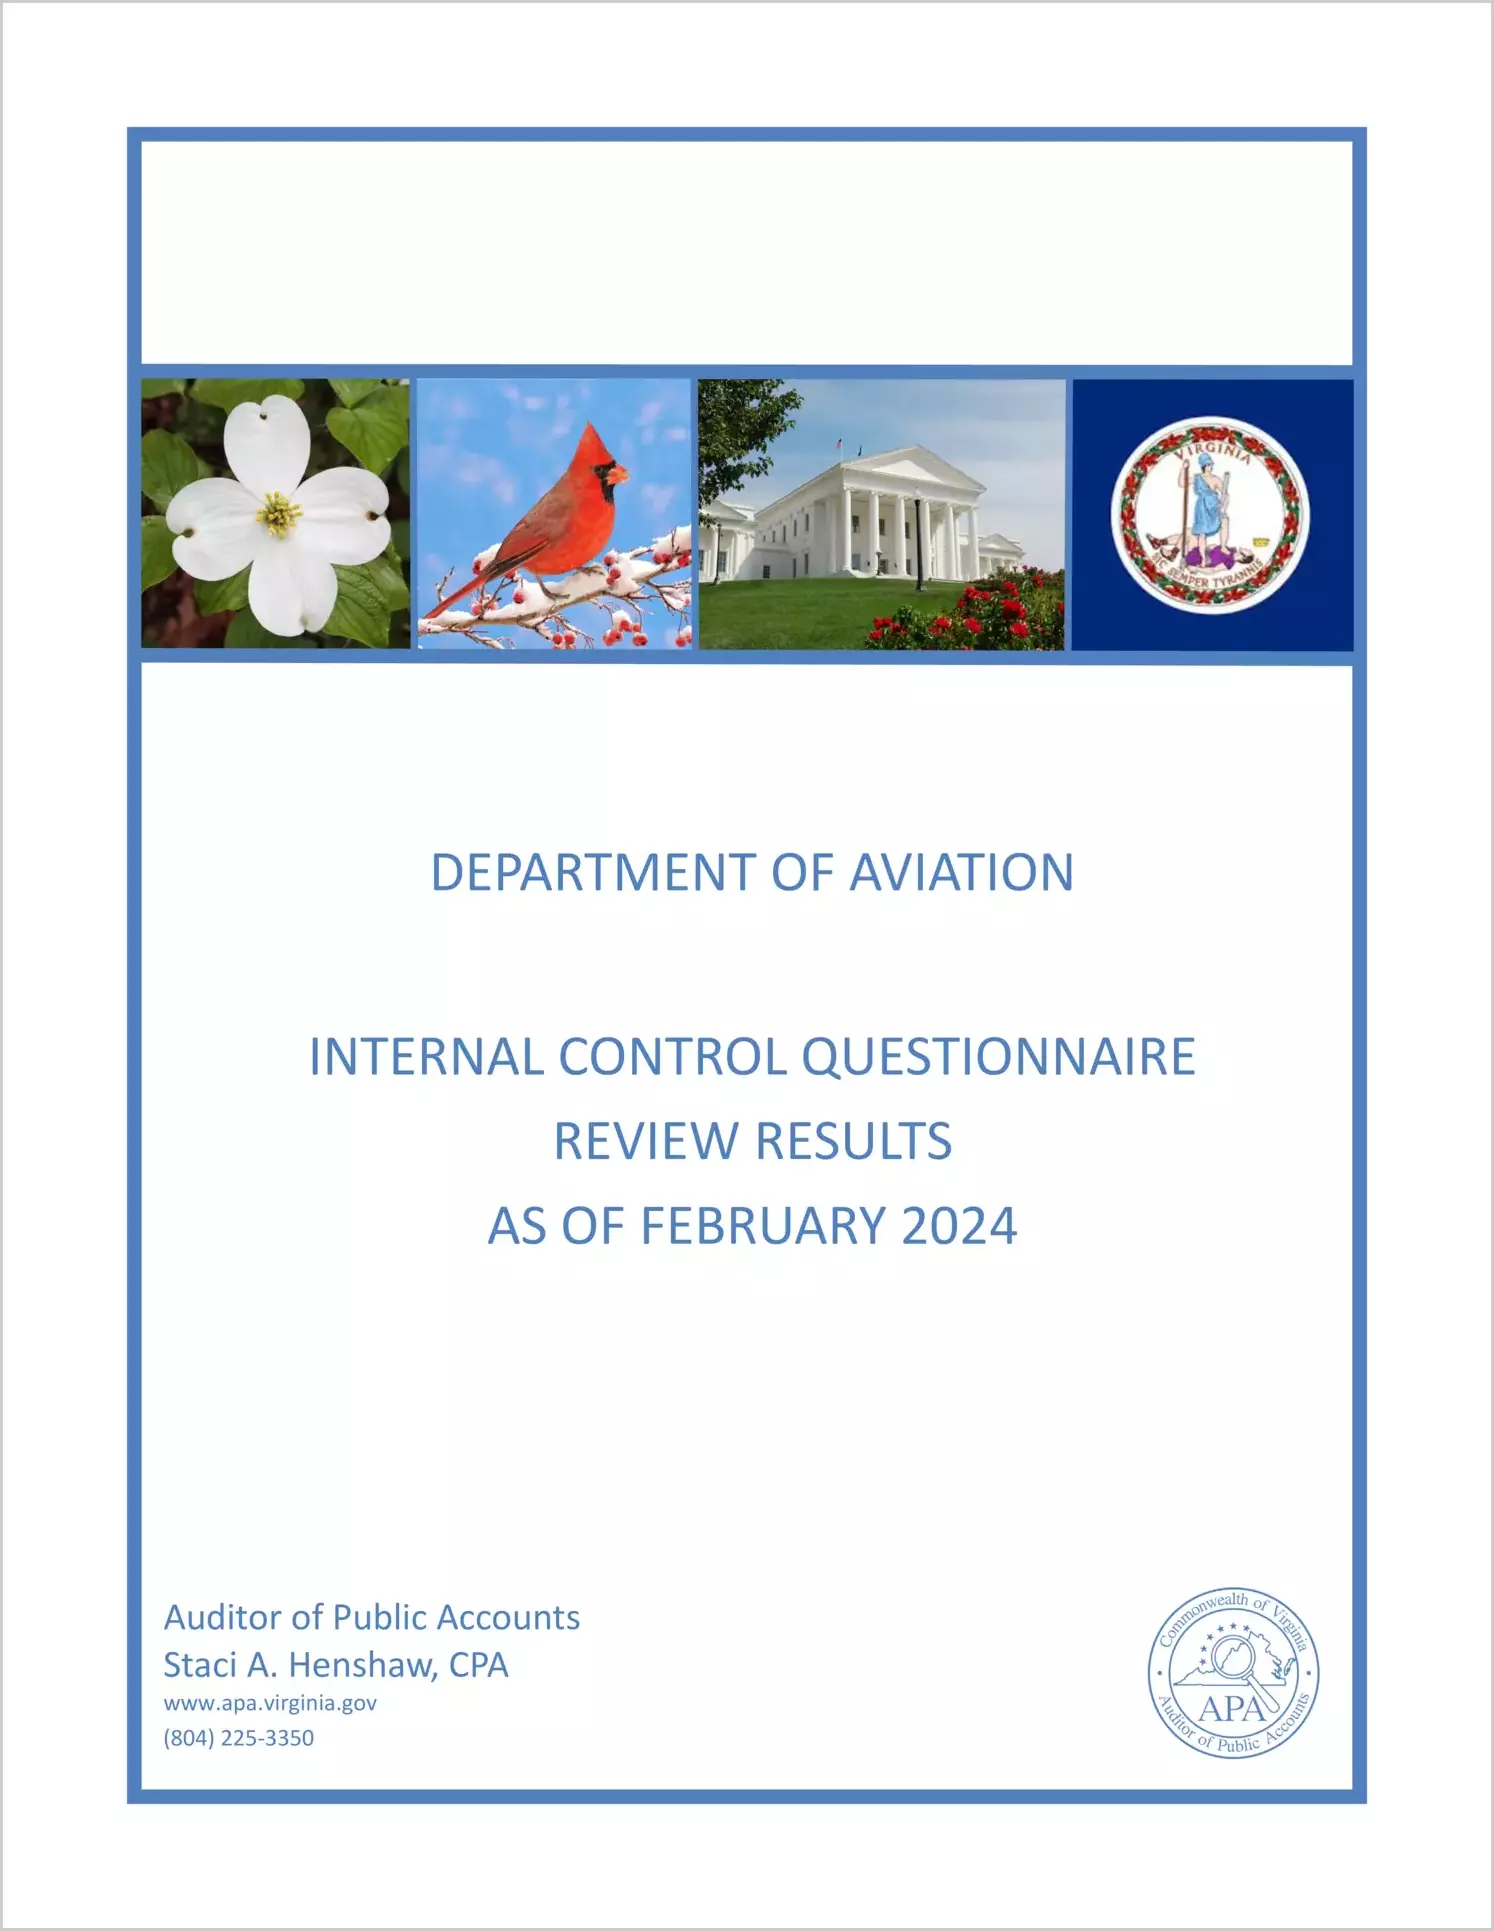 Department of Aviation Internal Control Questionnaire Review Results as of February 2024